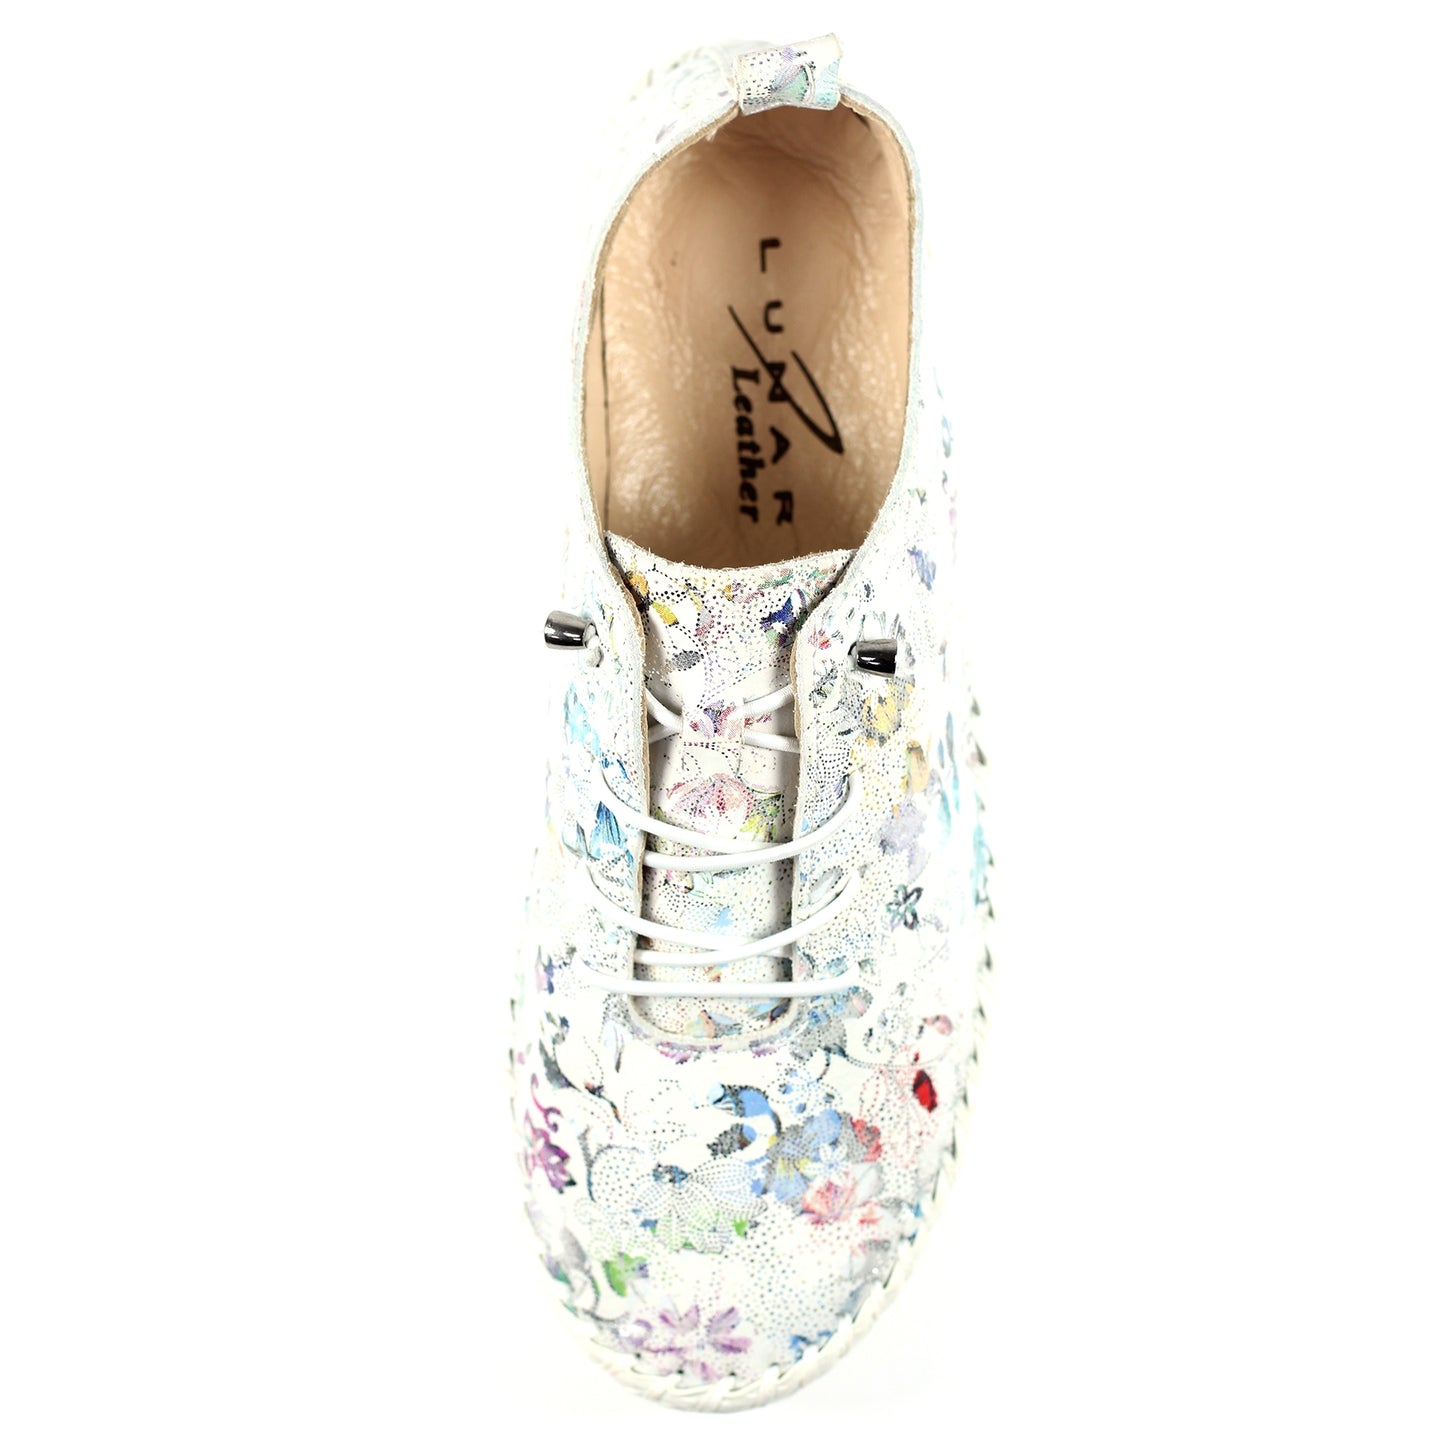 Womens Lunar Exbury Floral Leather Plimsoll Shoes White